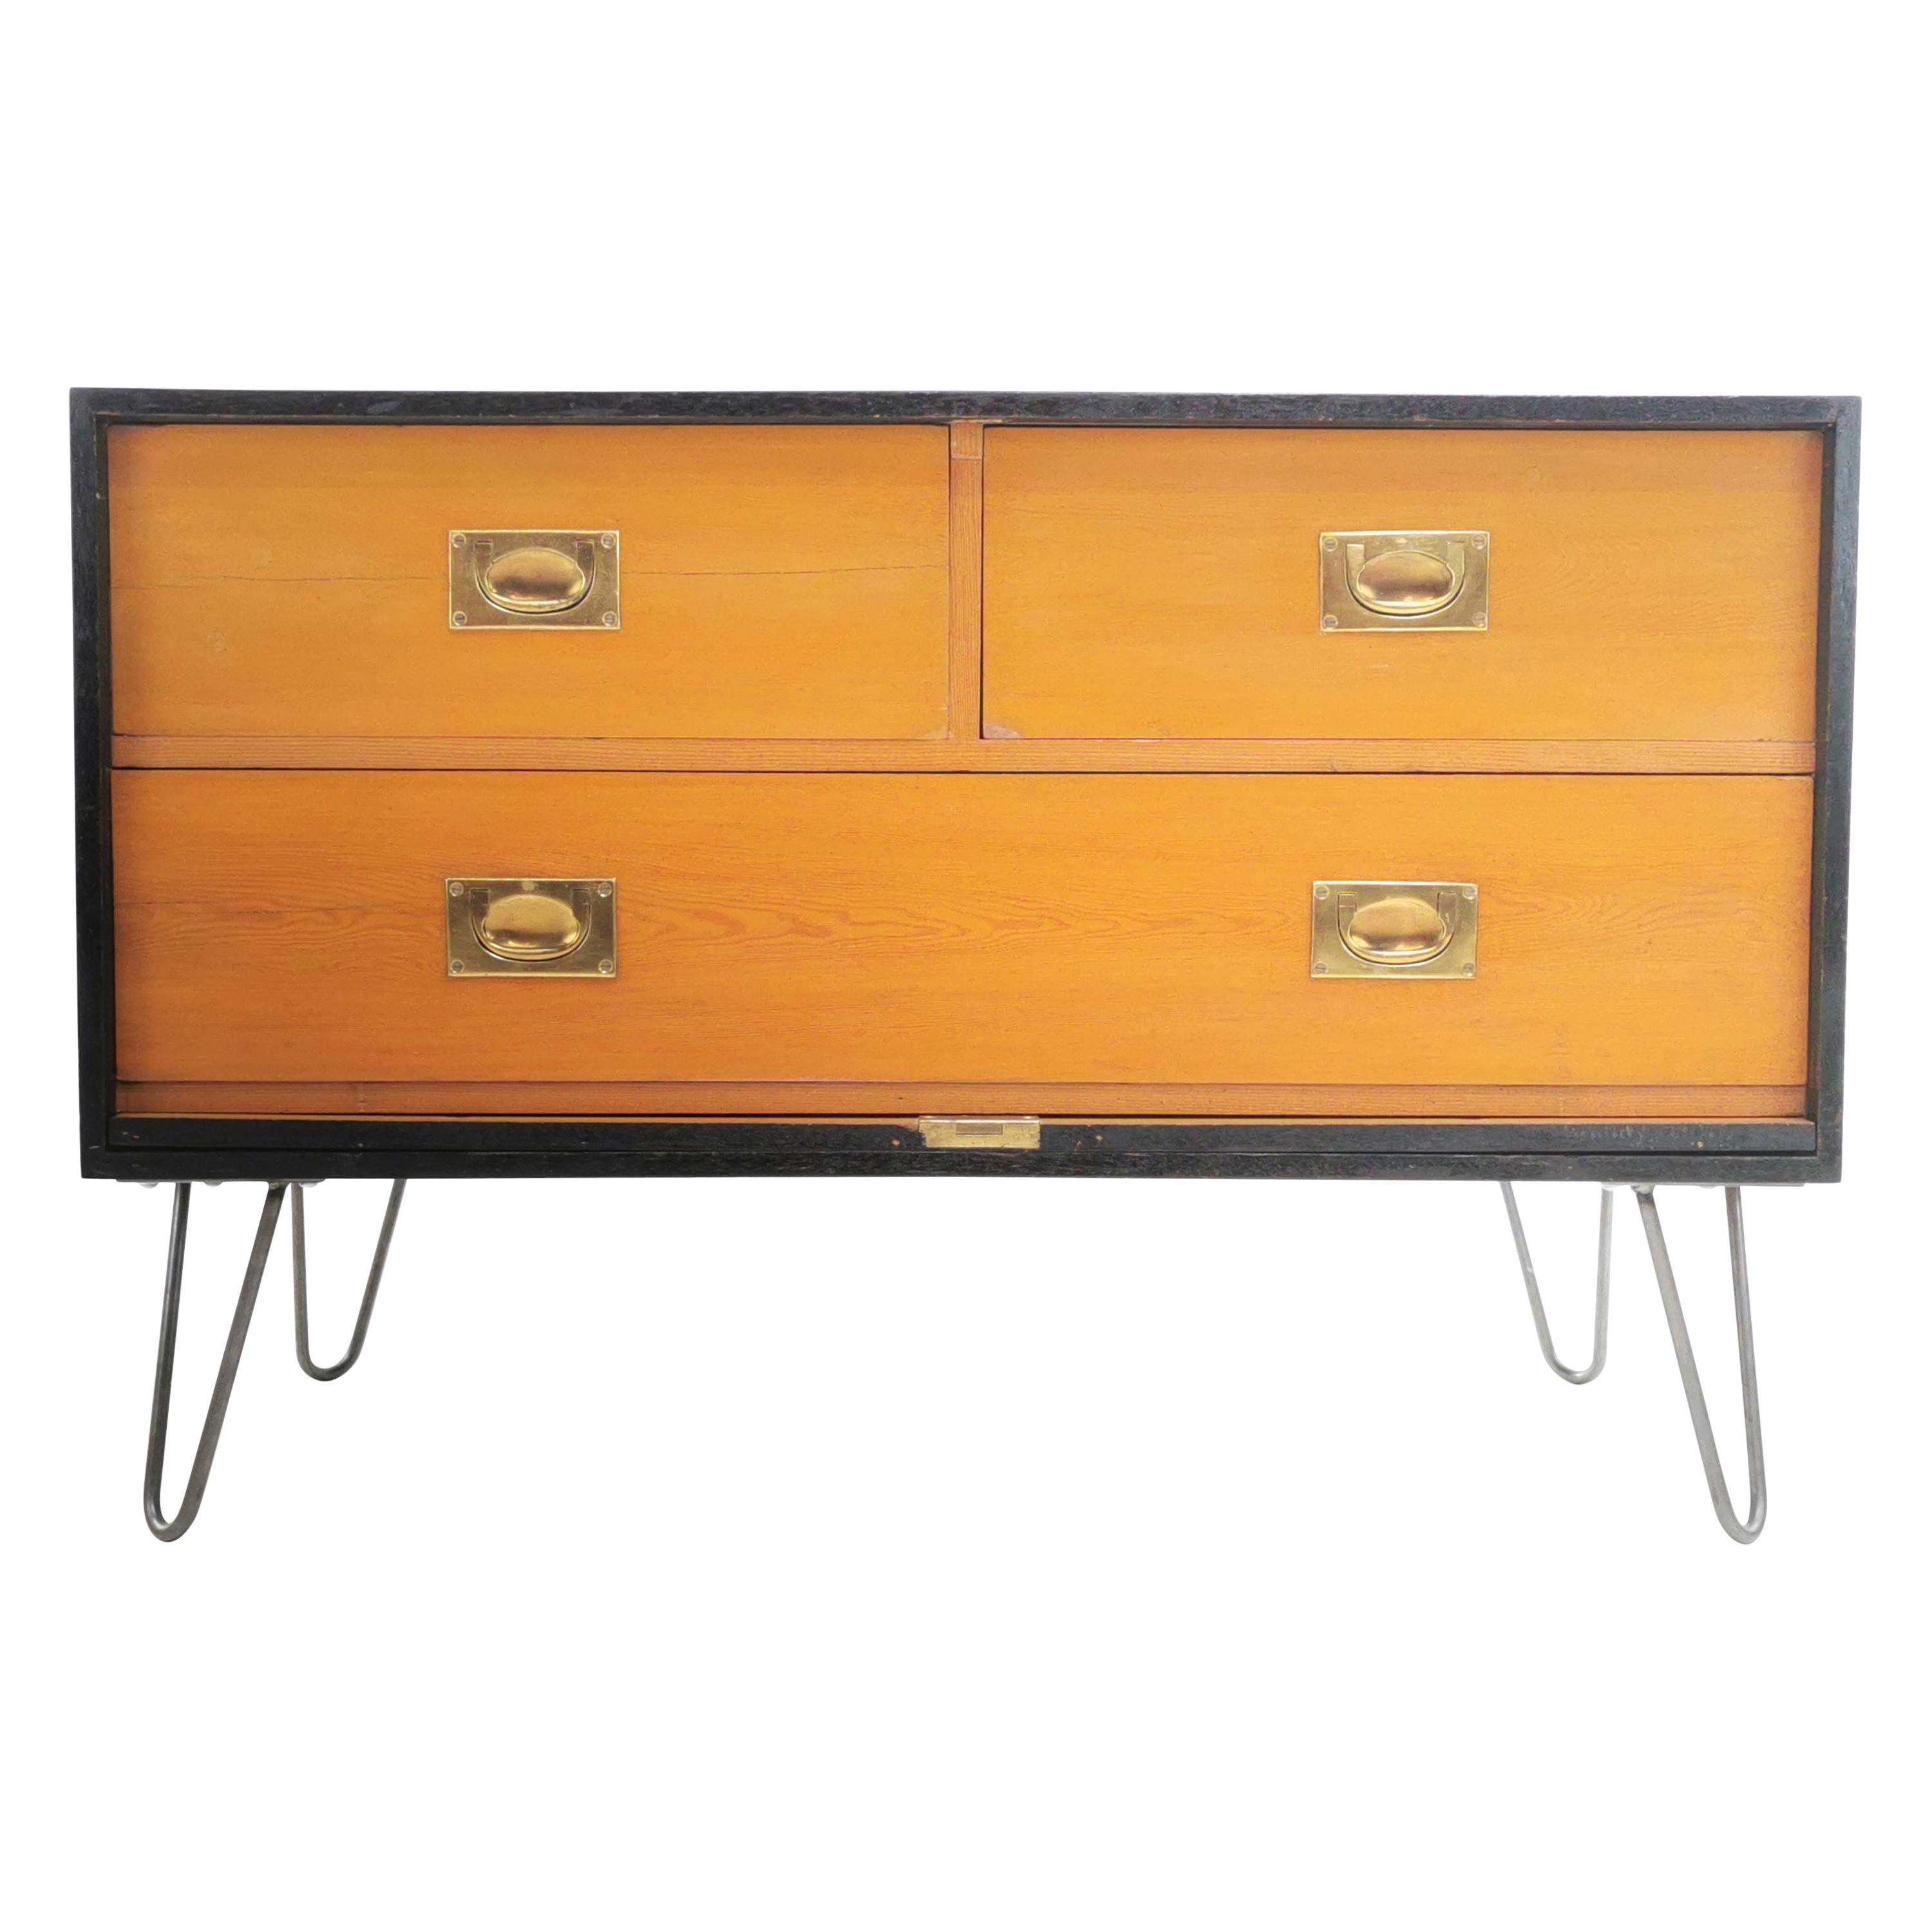 English Midcentury Military Travel Trunk Chest of Drawers, 1950s